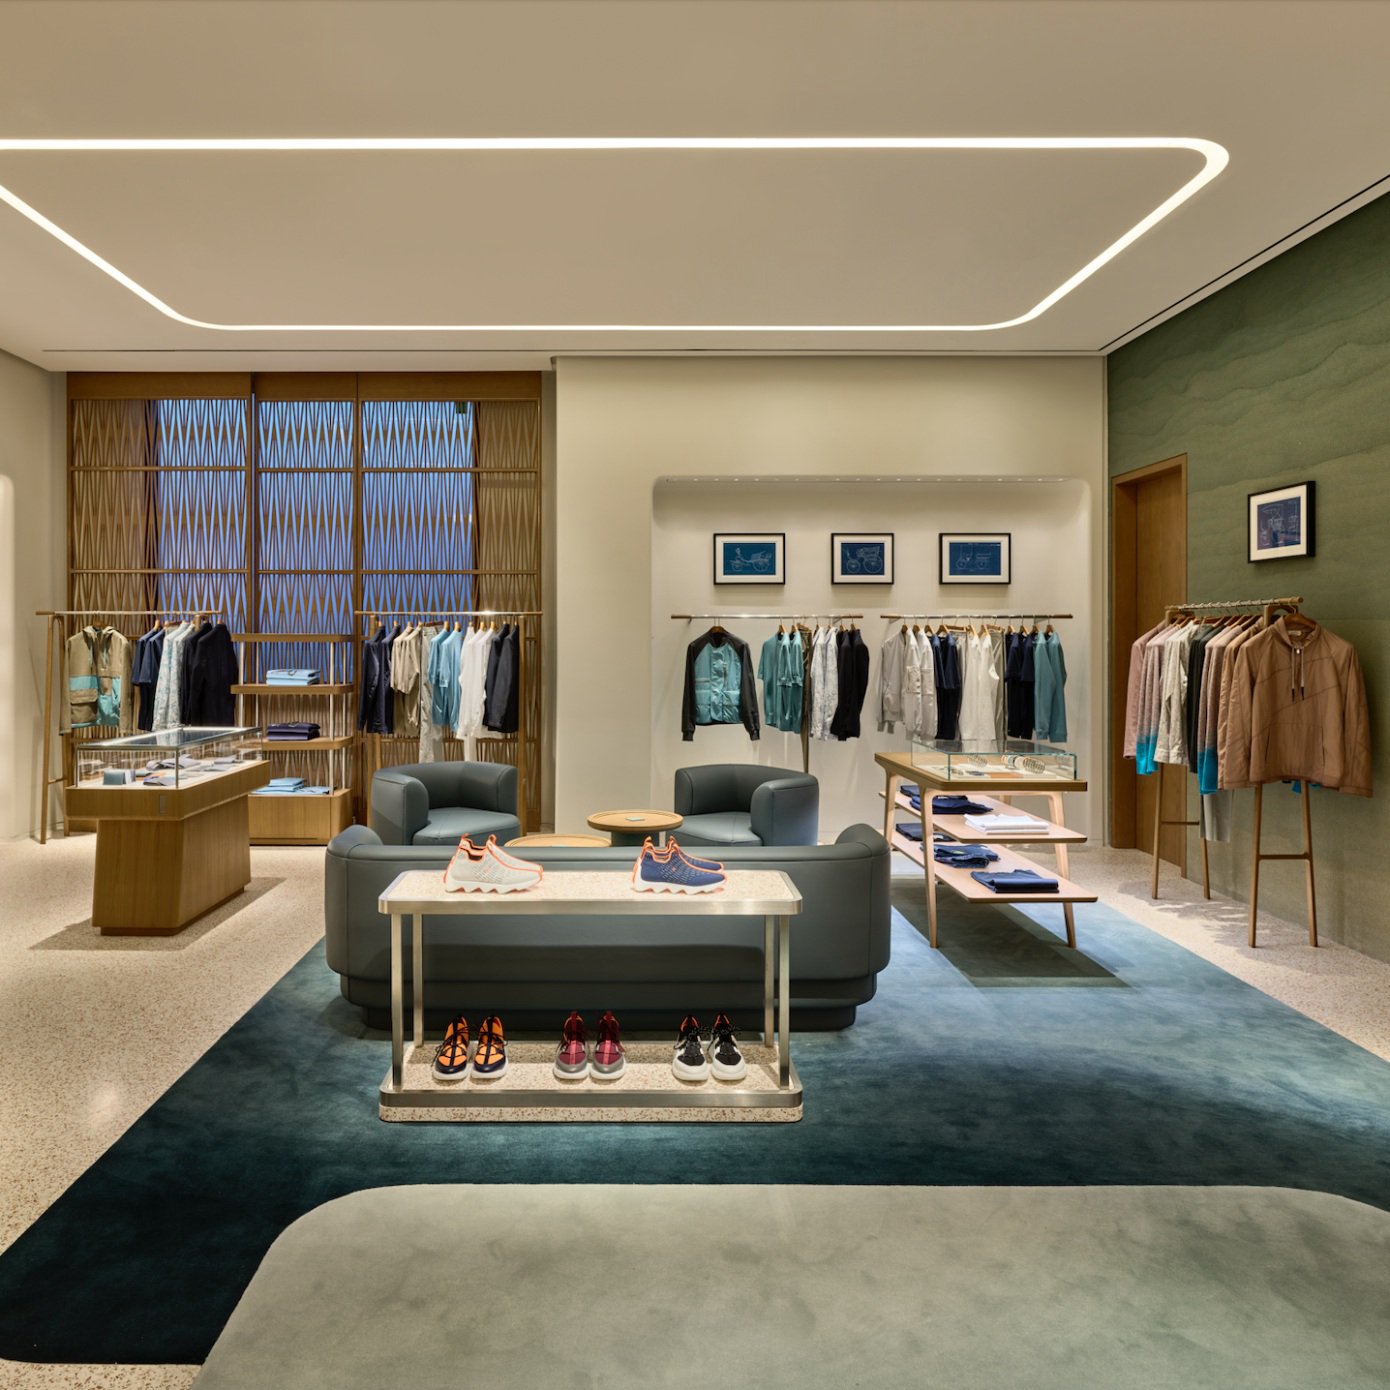 South Coast Plaza Celebrates 25 Years with a Newly Renovated Hermès Boutique